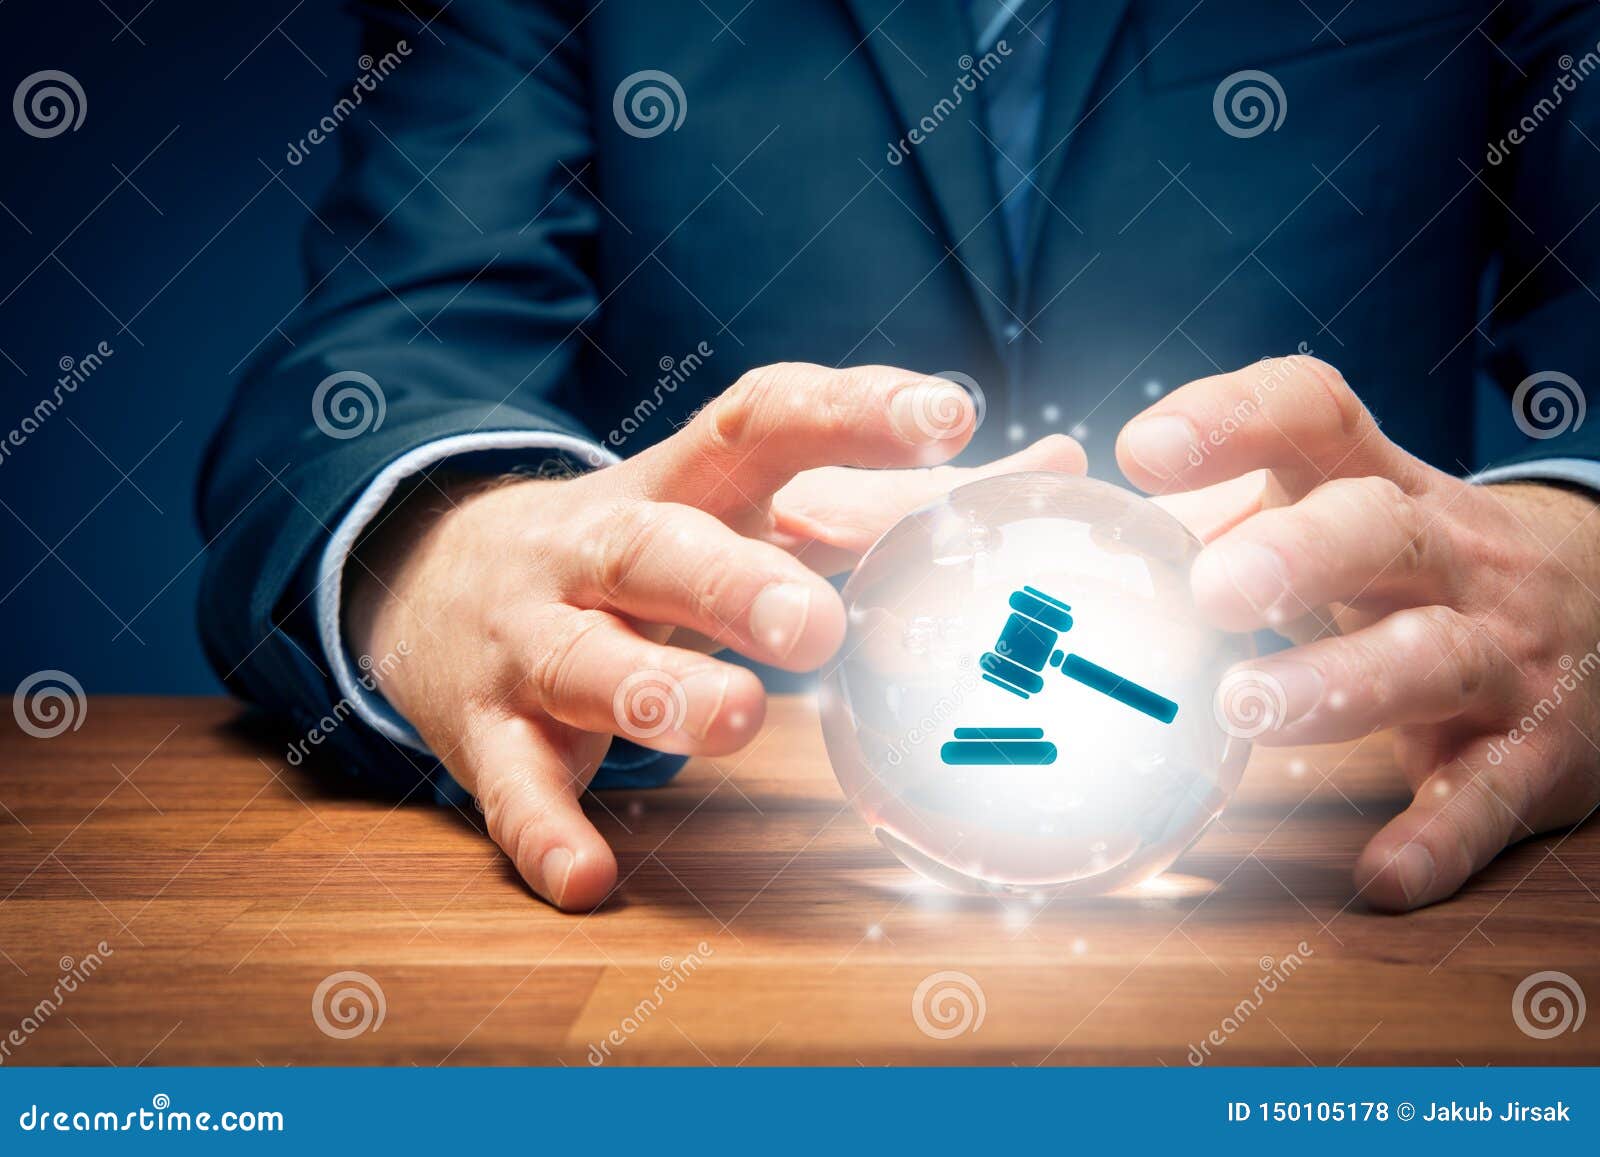 lawyer or advocate predict result of a court decision